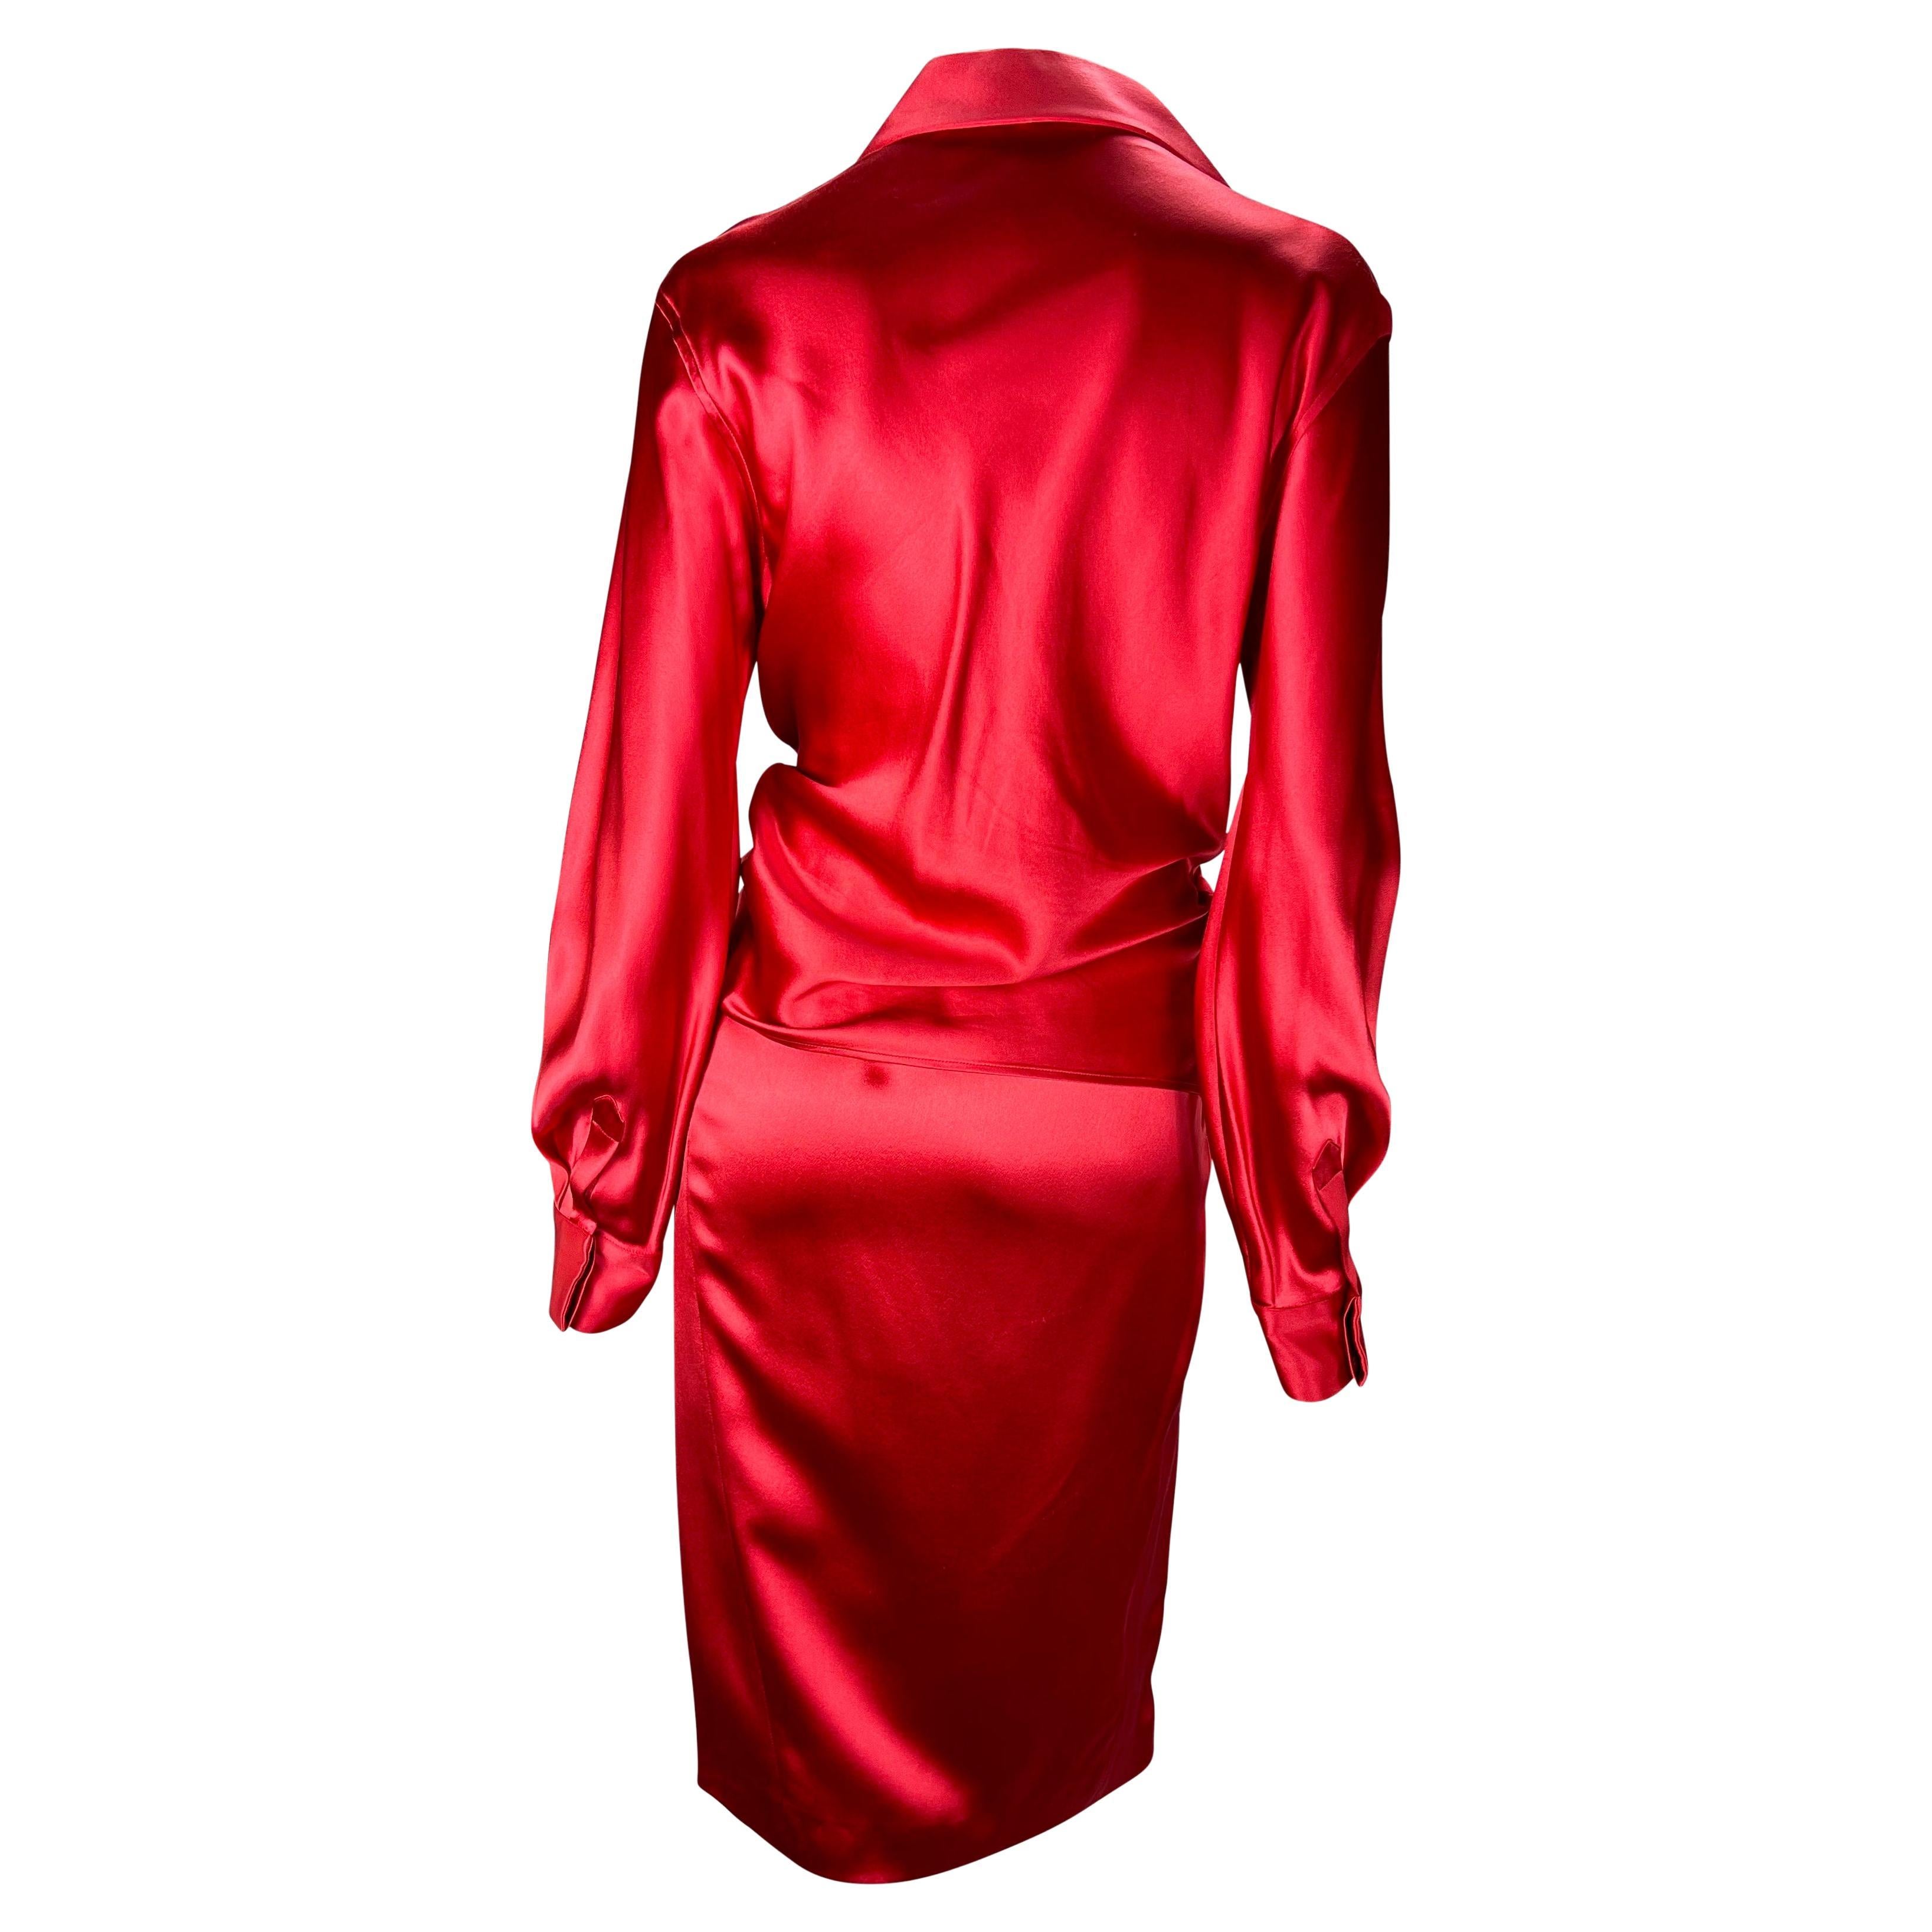 Women's S/S 2001 Gucci by Tom Ford Red Plunging Satin Wrap Top Slit Skirt Set For Sale